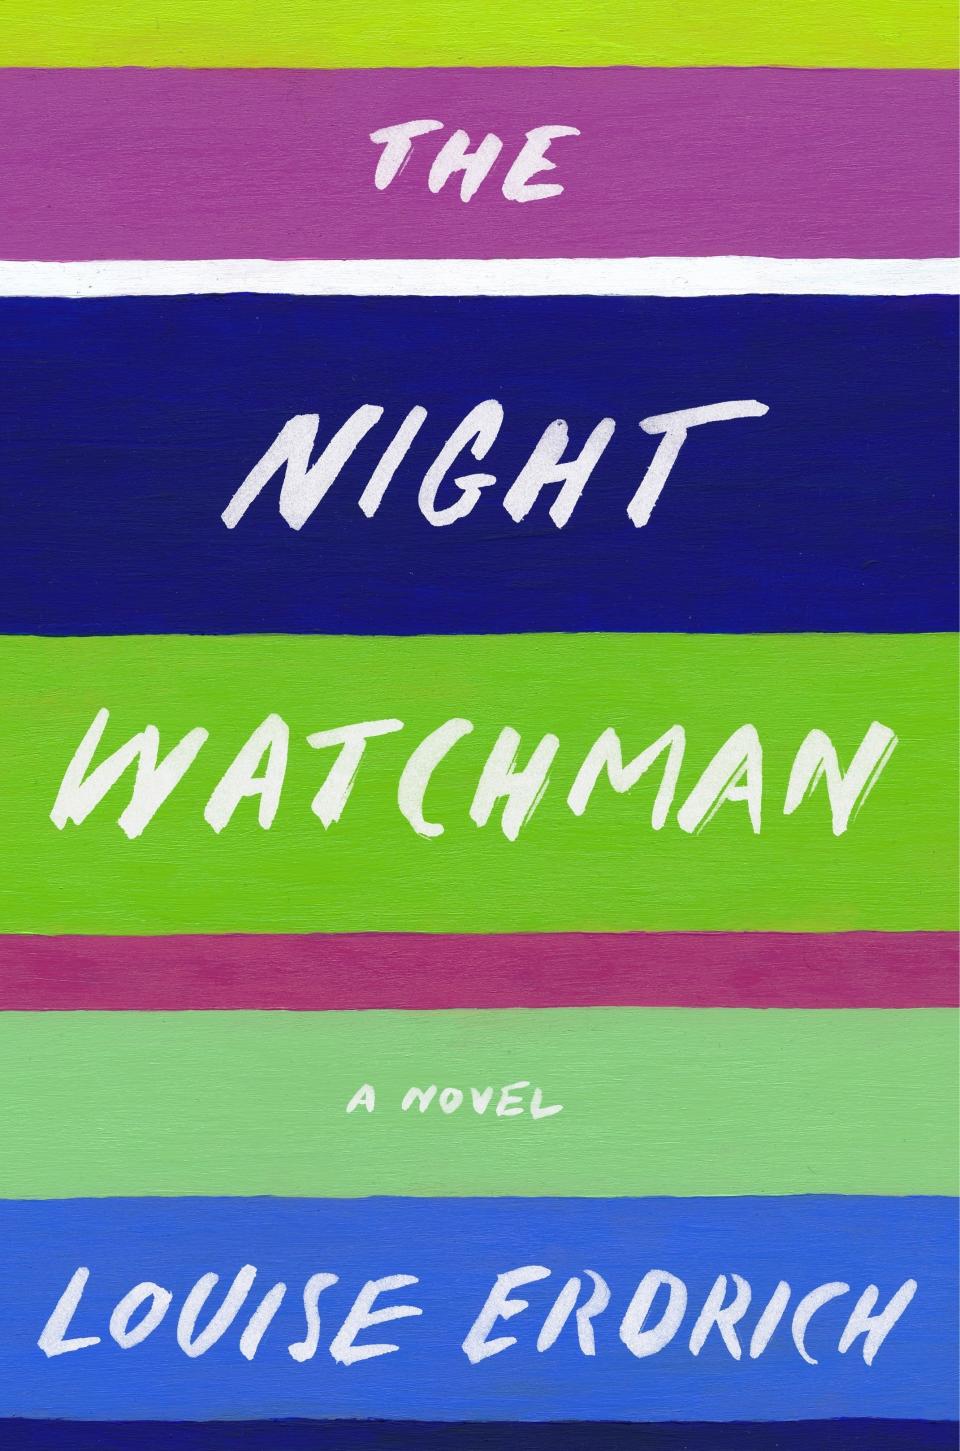 This cover image released by Harper shows "The Night Watchman" by Louis Erdrich, winner of the Pulitzer Prize for Fiction. (Harper via AP)